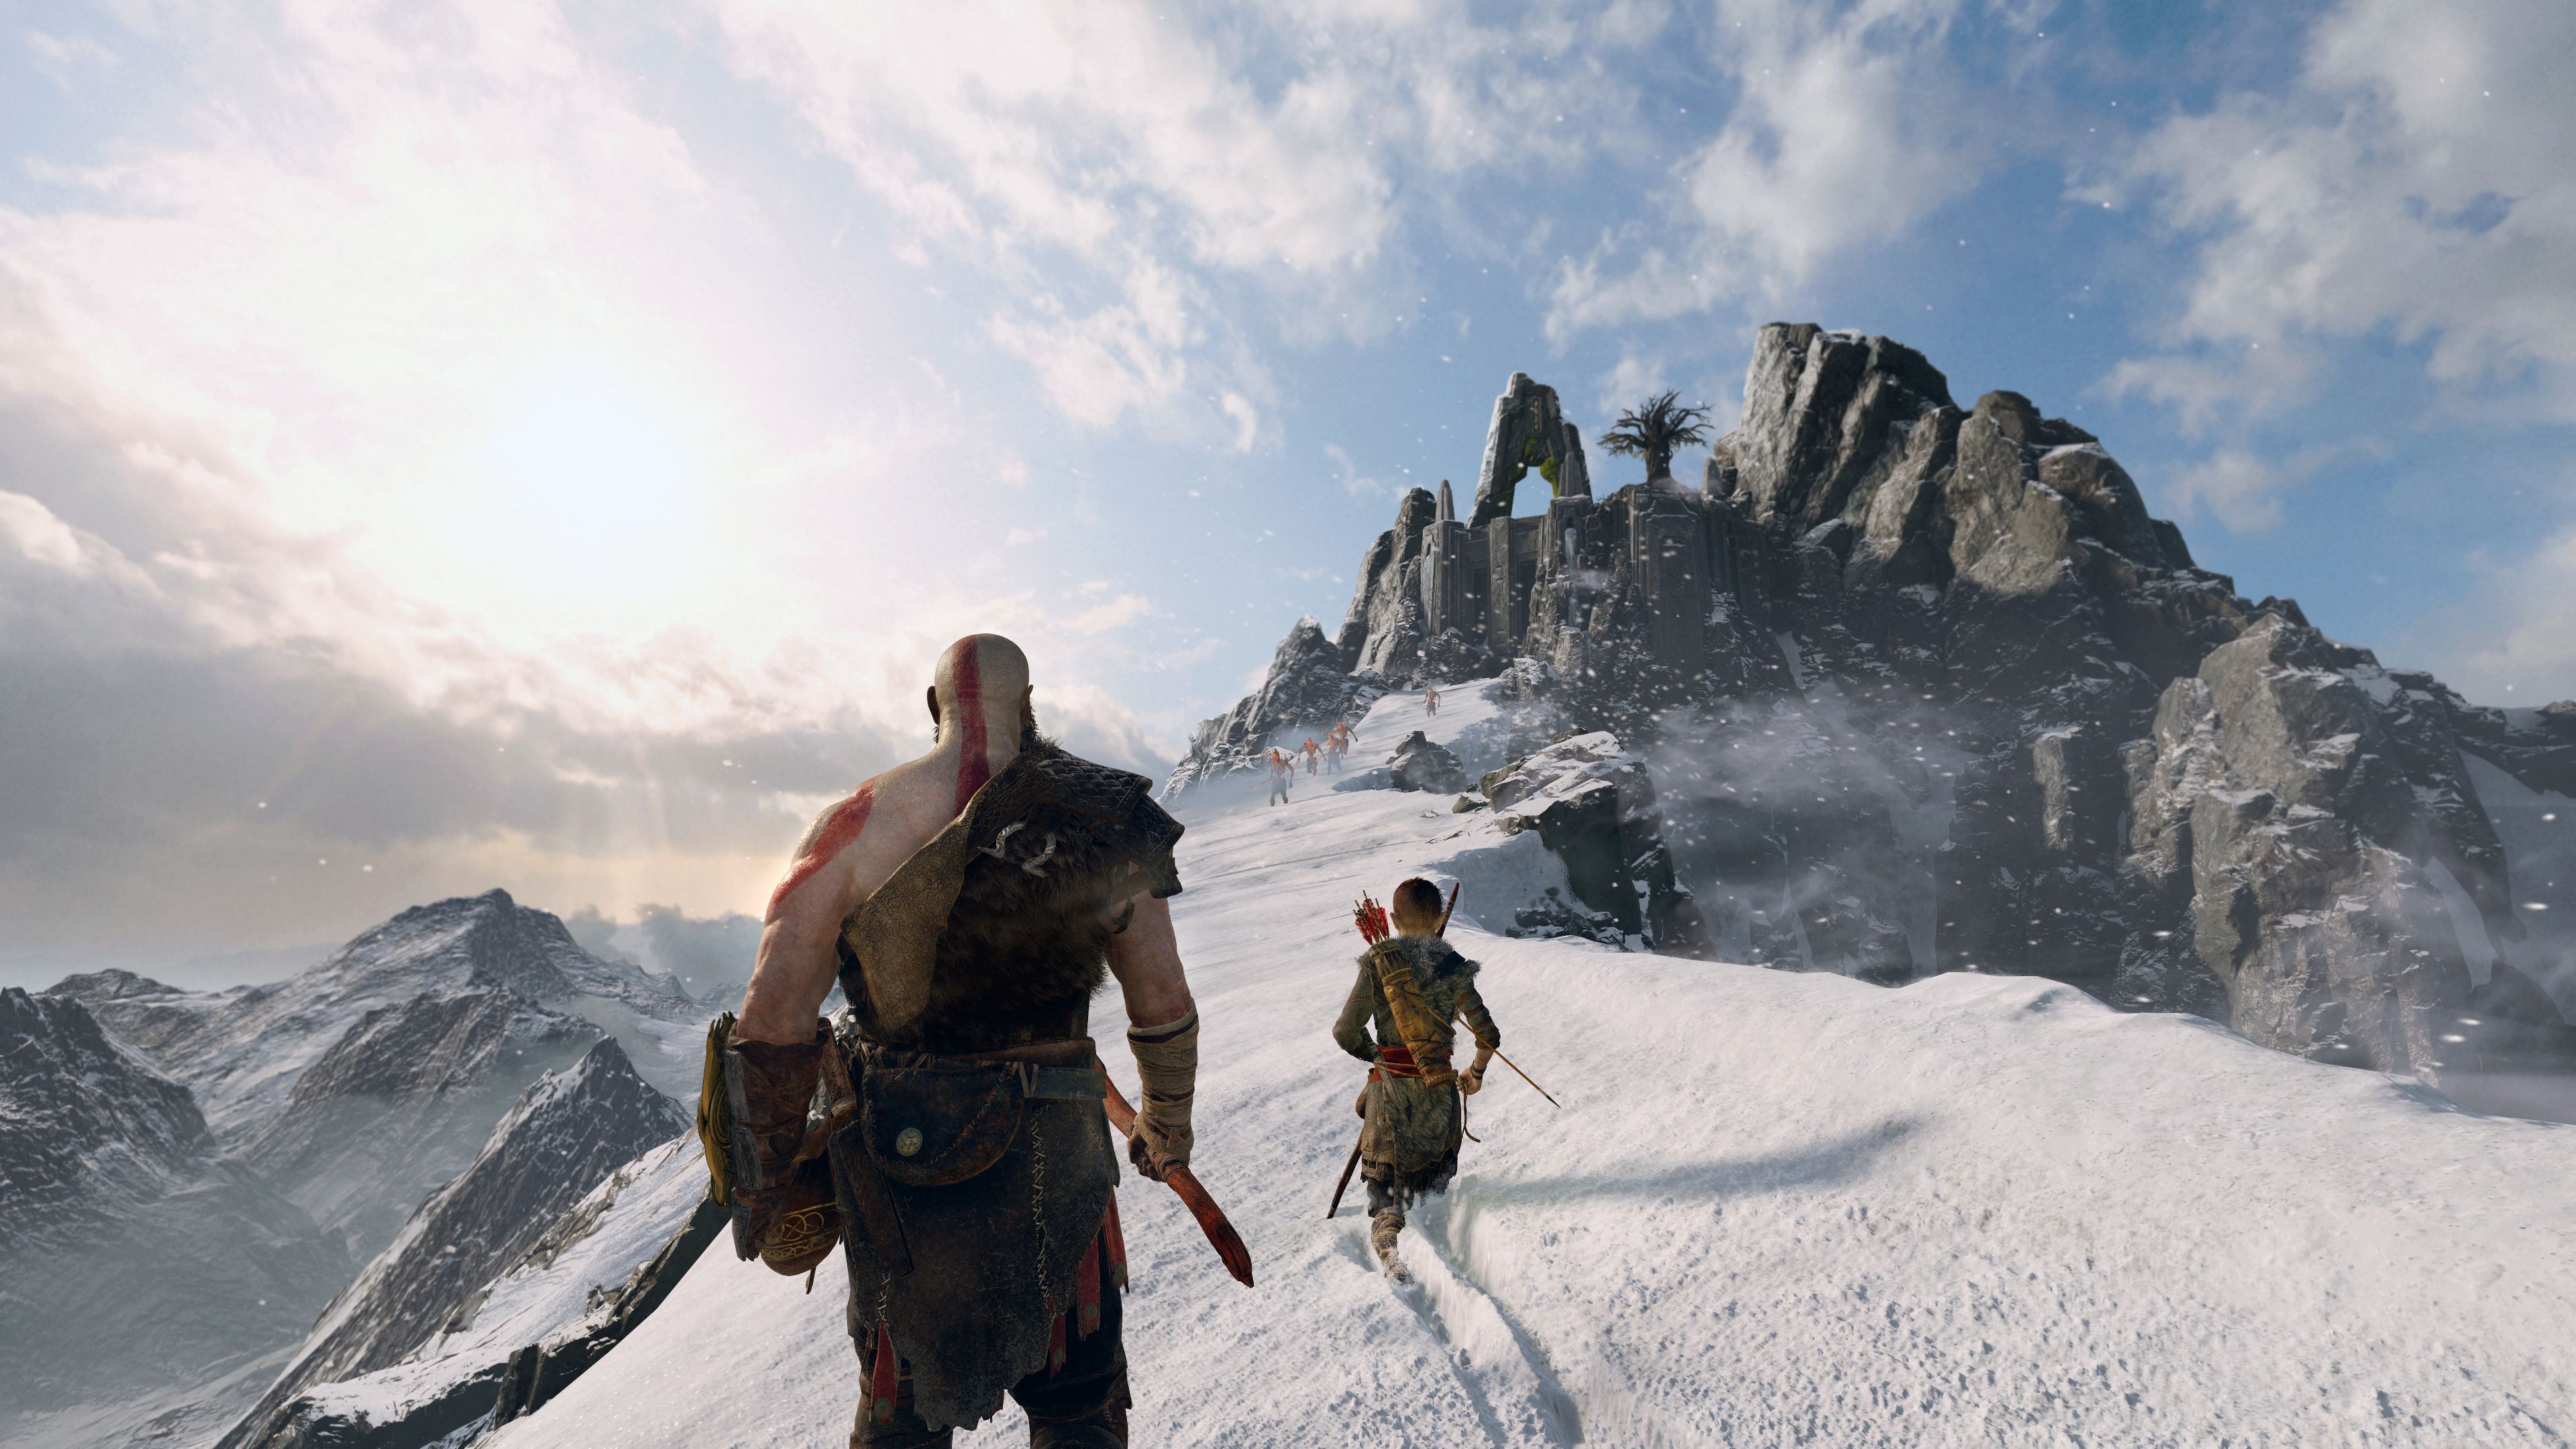 Gaming Analyst Predicts That God of War PS4 Could Sell Around 10